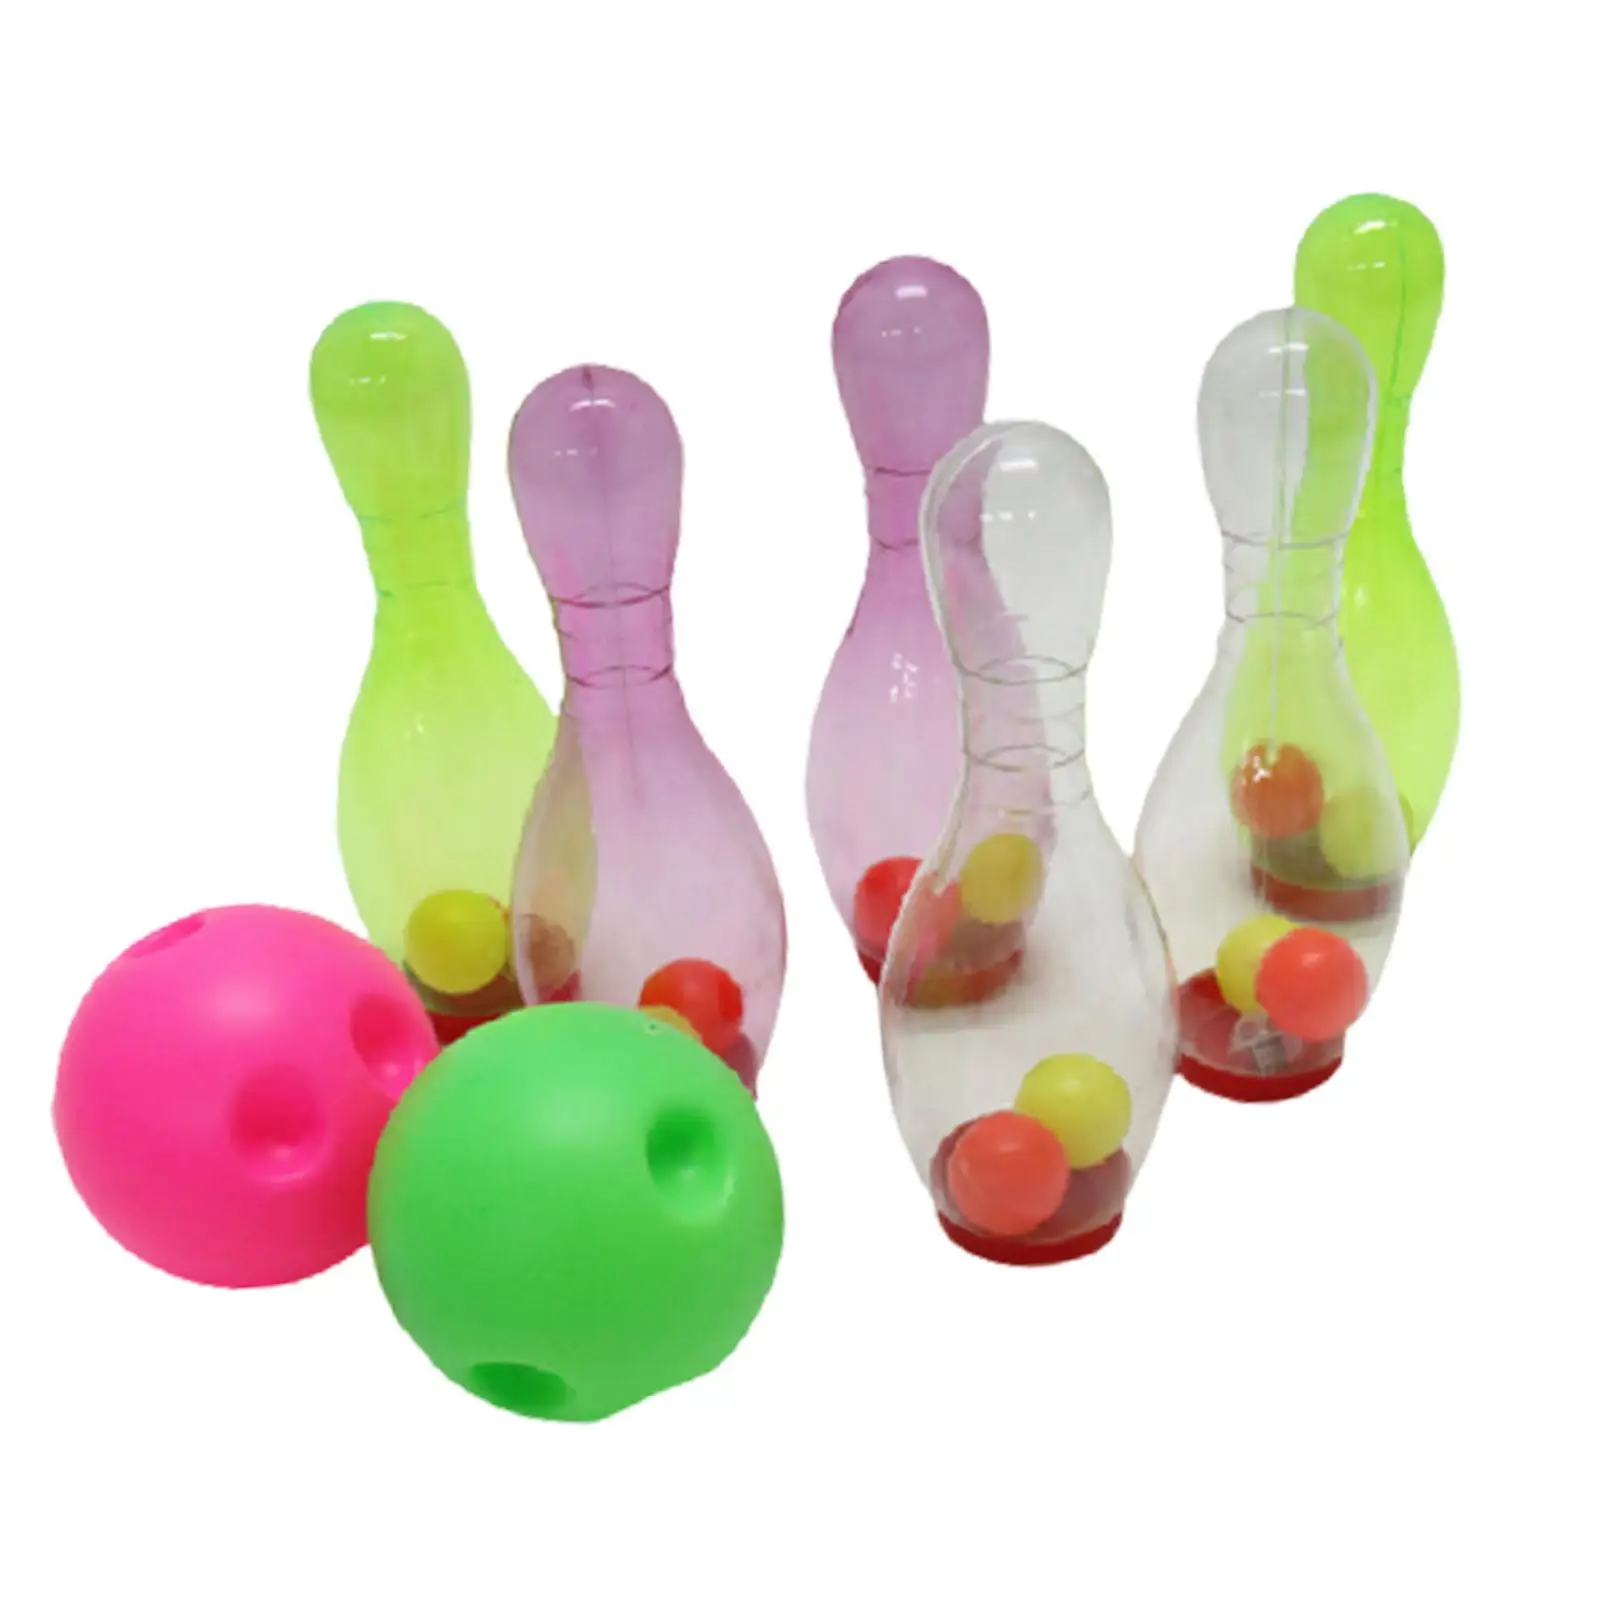 Kids Bowling Play Set Light up Motor Skills Includes 6 Bowling Pins and 2 Ball for Boys Girls Child Preschooler 2,3,4,5 Year Old